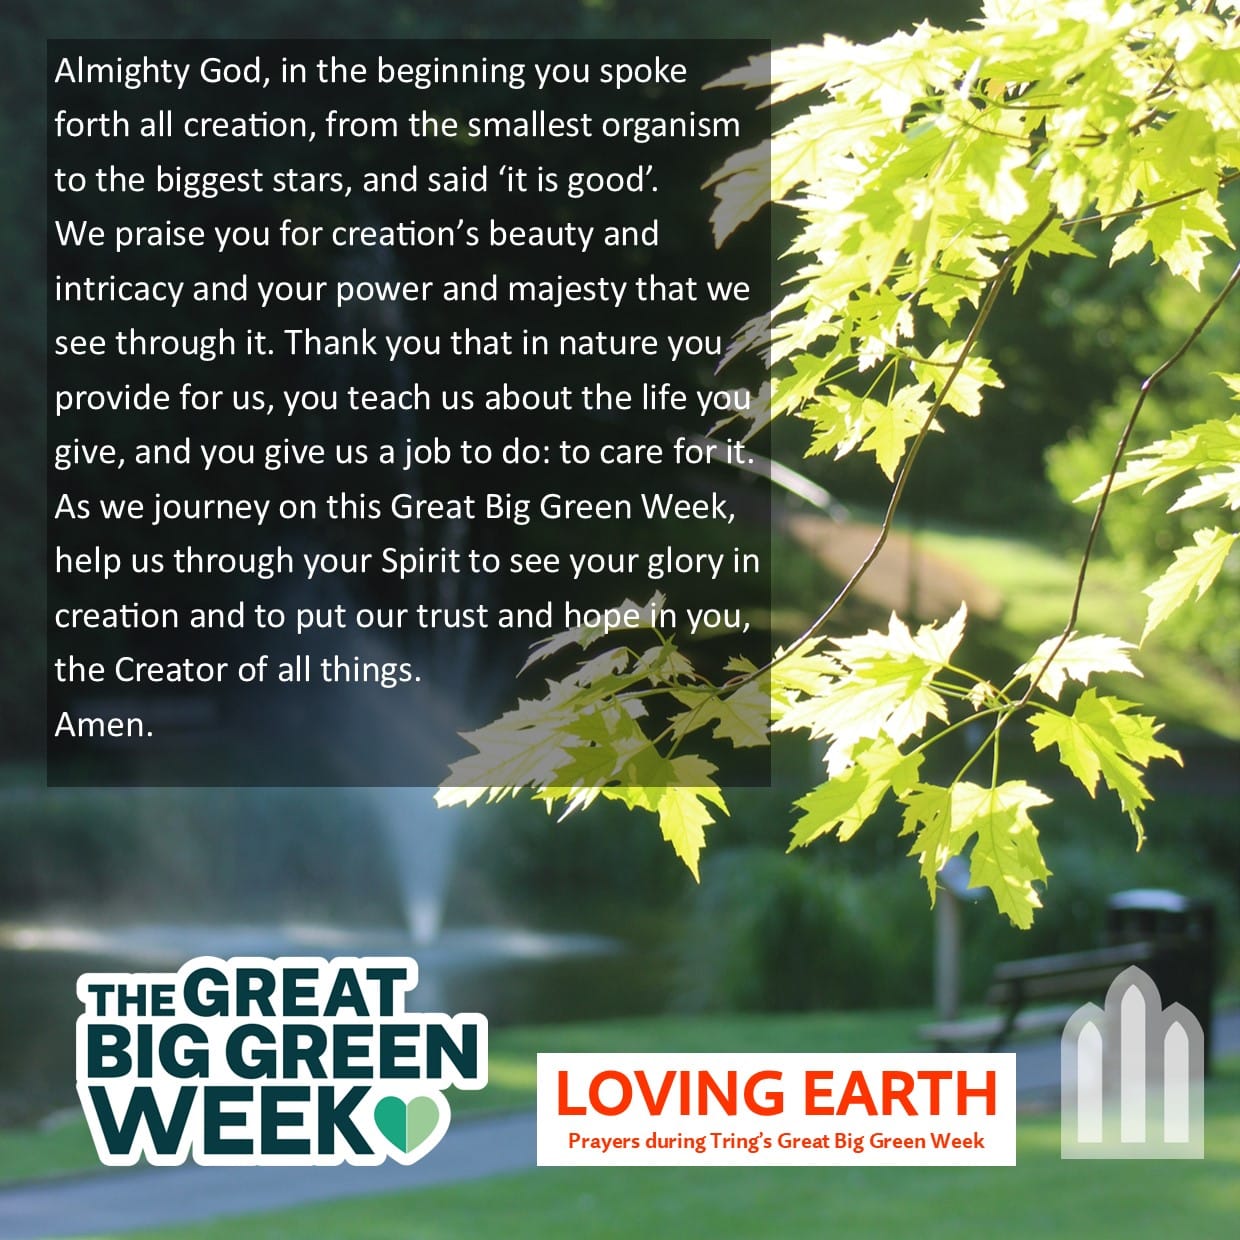 Featured image for “Creation care prayers for Great Big Green Week from High Street Baptist Church, Tring”